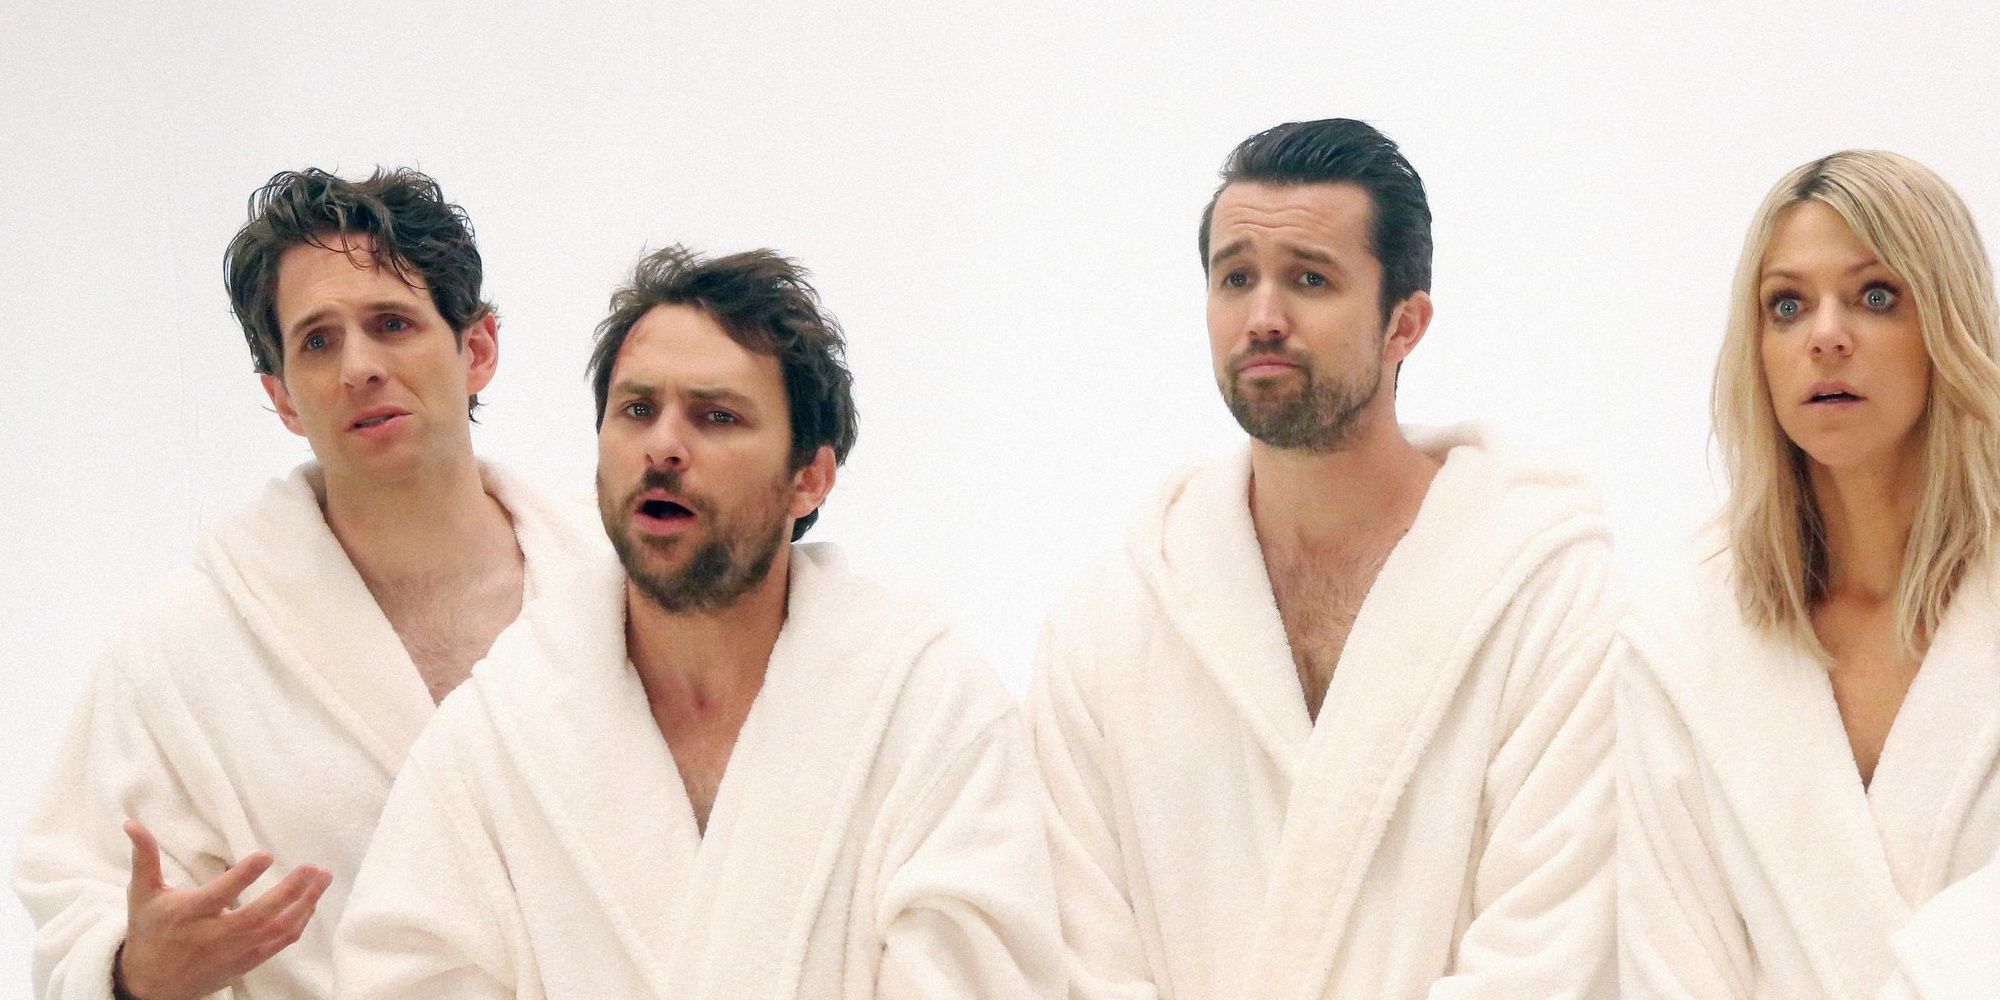 The Gang from 'It's Always Sunny in Philadelphia' in white robes 